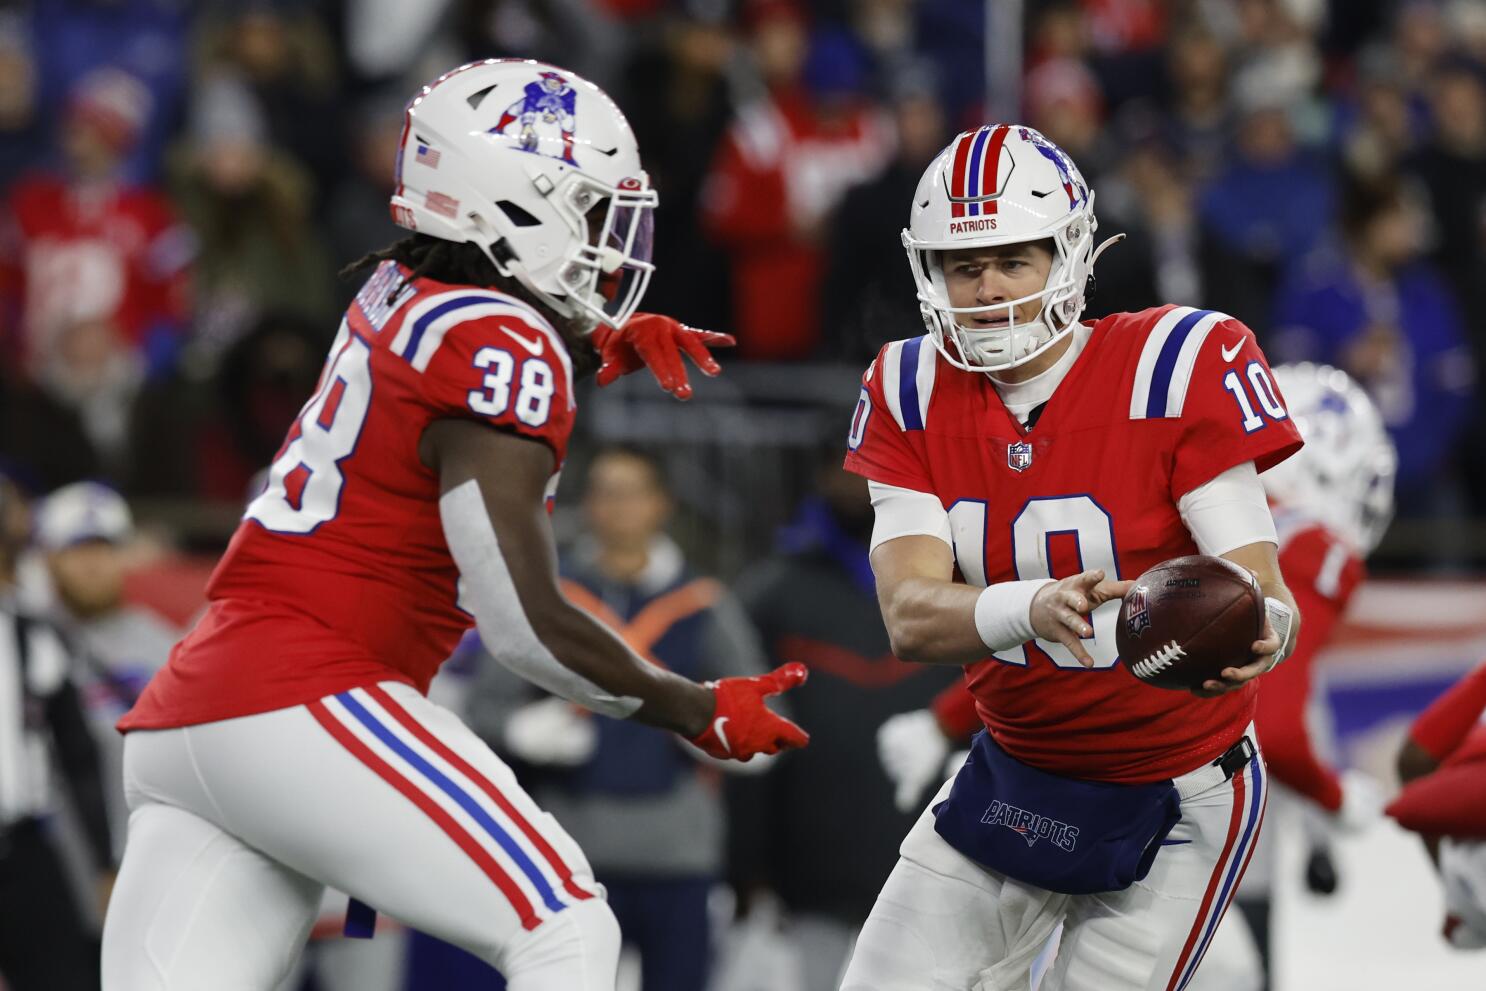 Pats face Cards on Monday night, look to end 2-game skid - The San